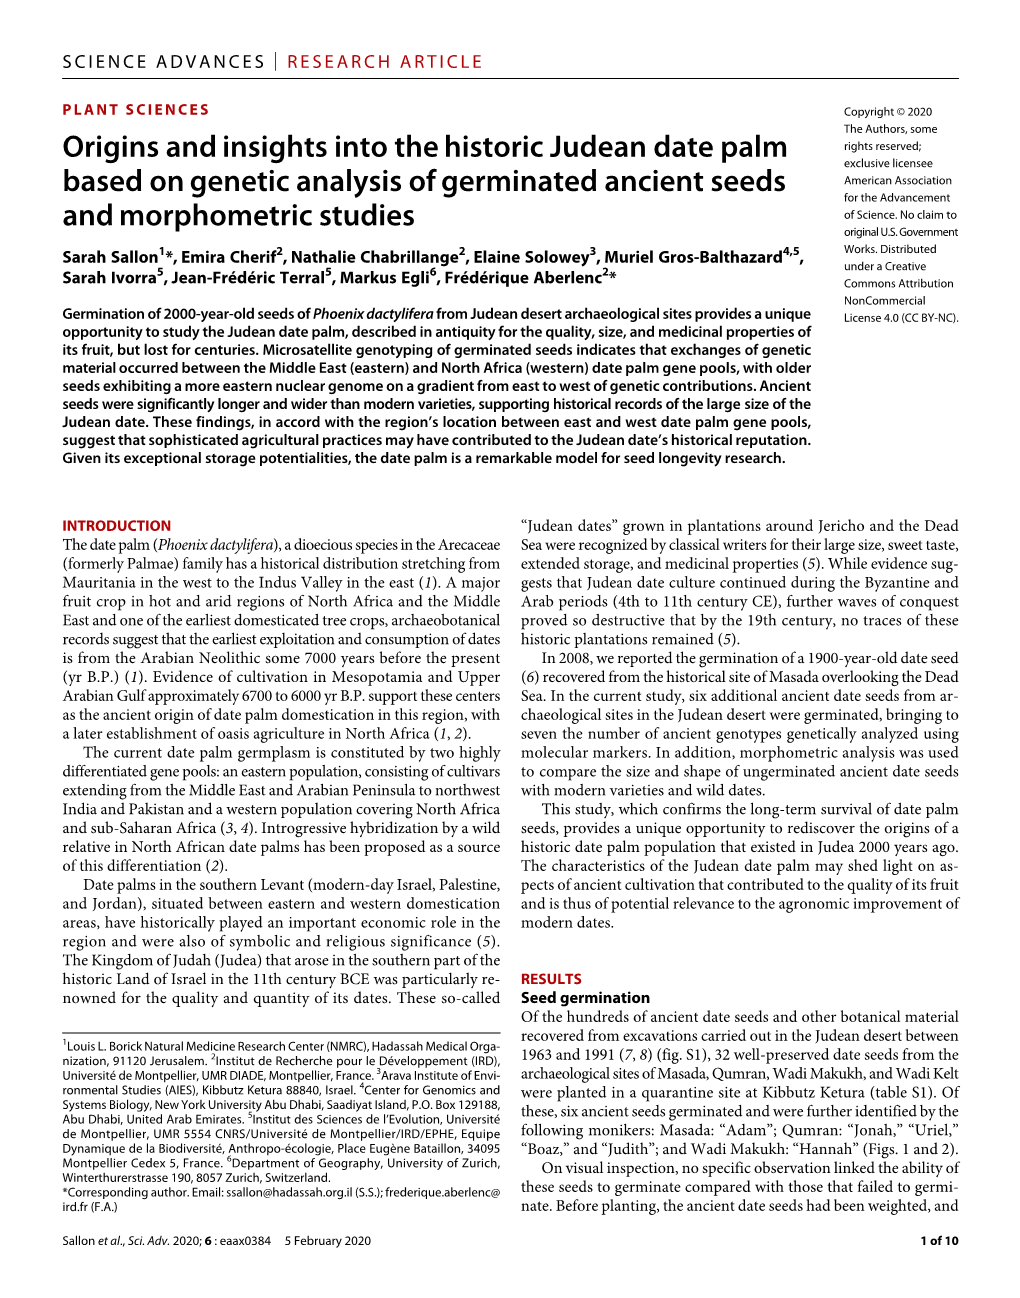 Origins and Insights Into the Historic Judean Date Palm Based on Genetic Analysis of Germinated Ancient Seeds and Morphometric S